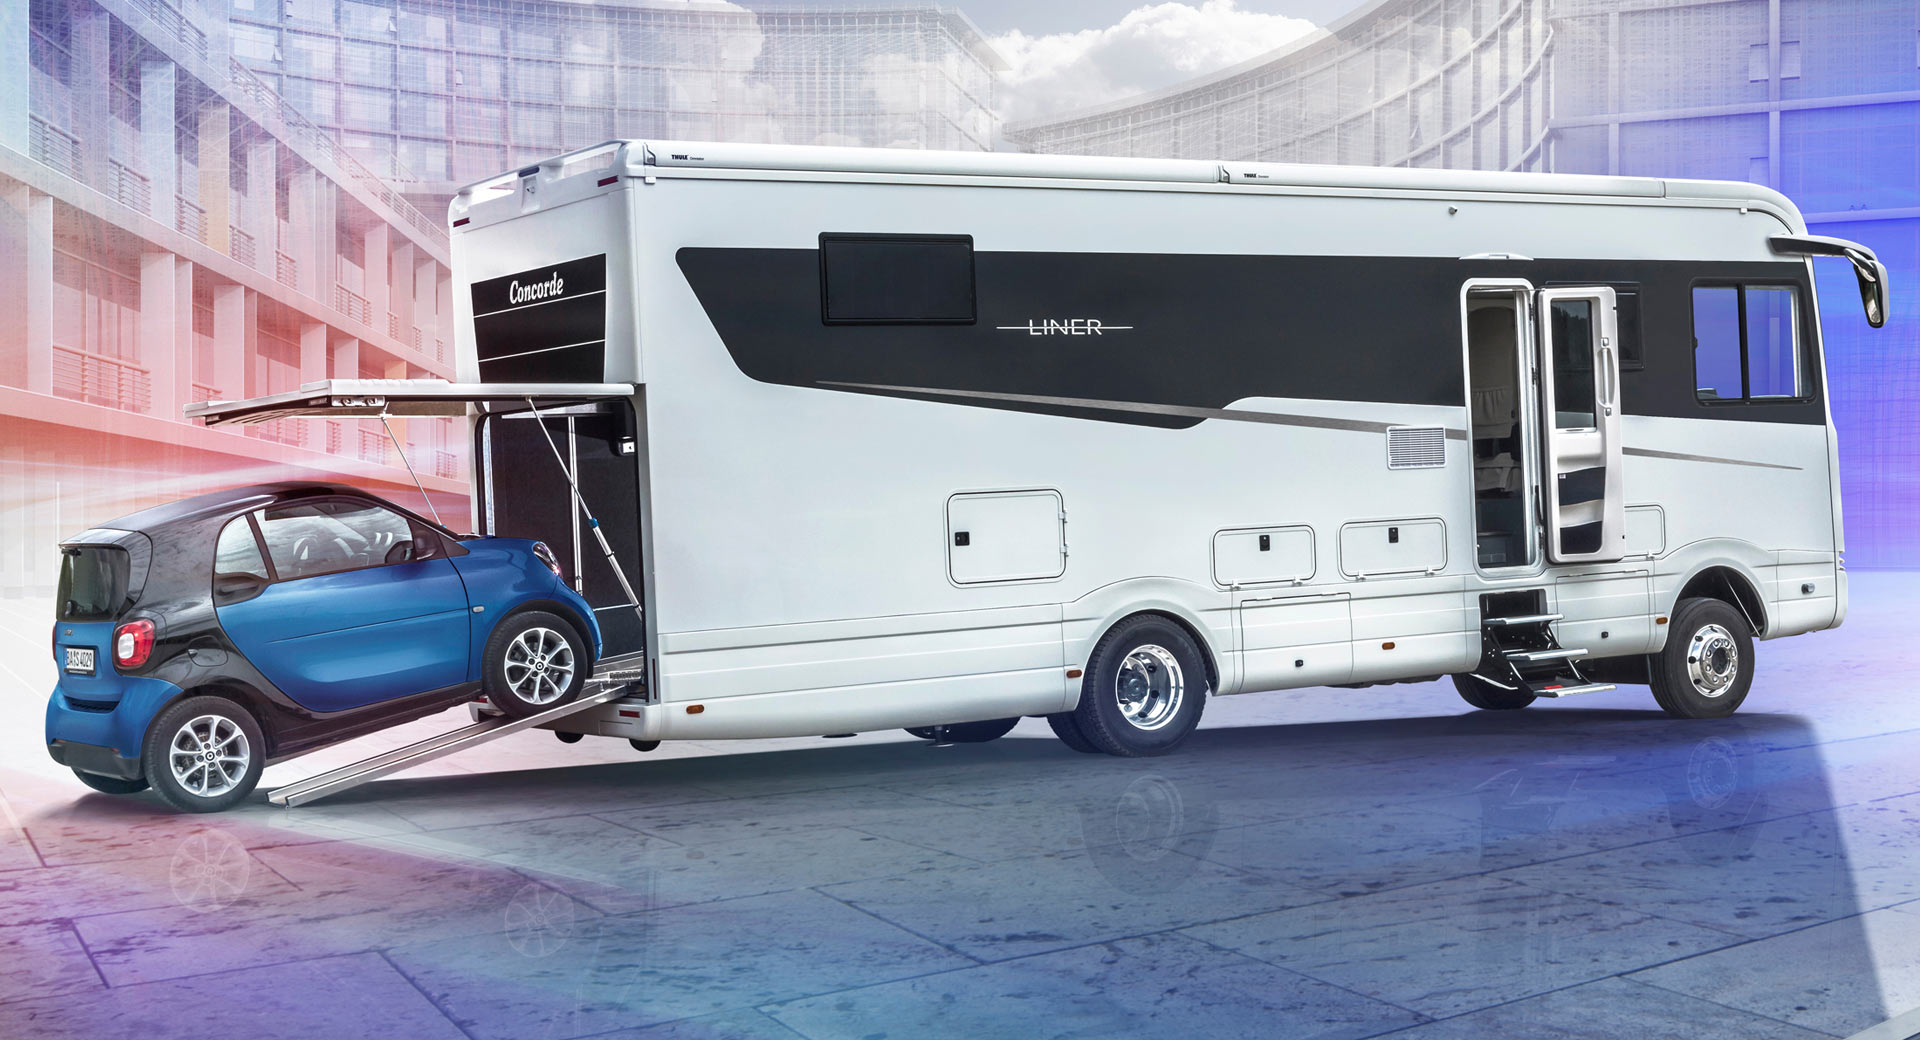 Luxury Motorhome With A Built In Garage